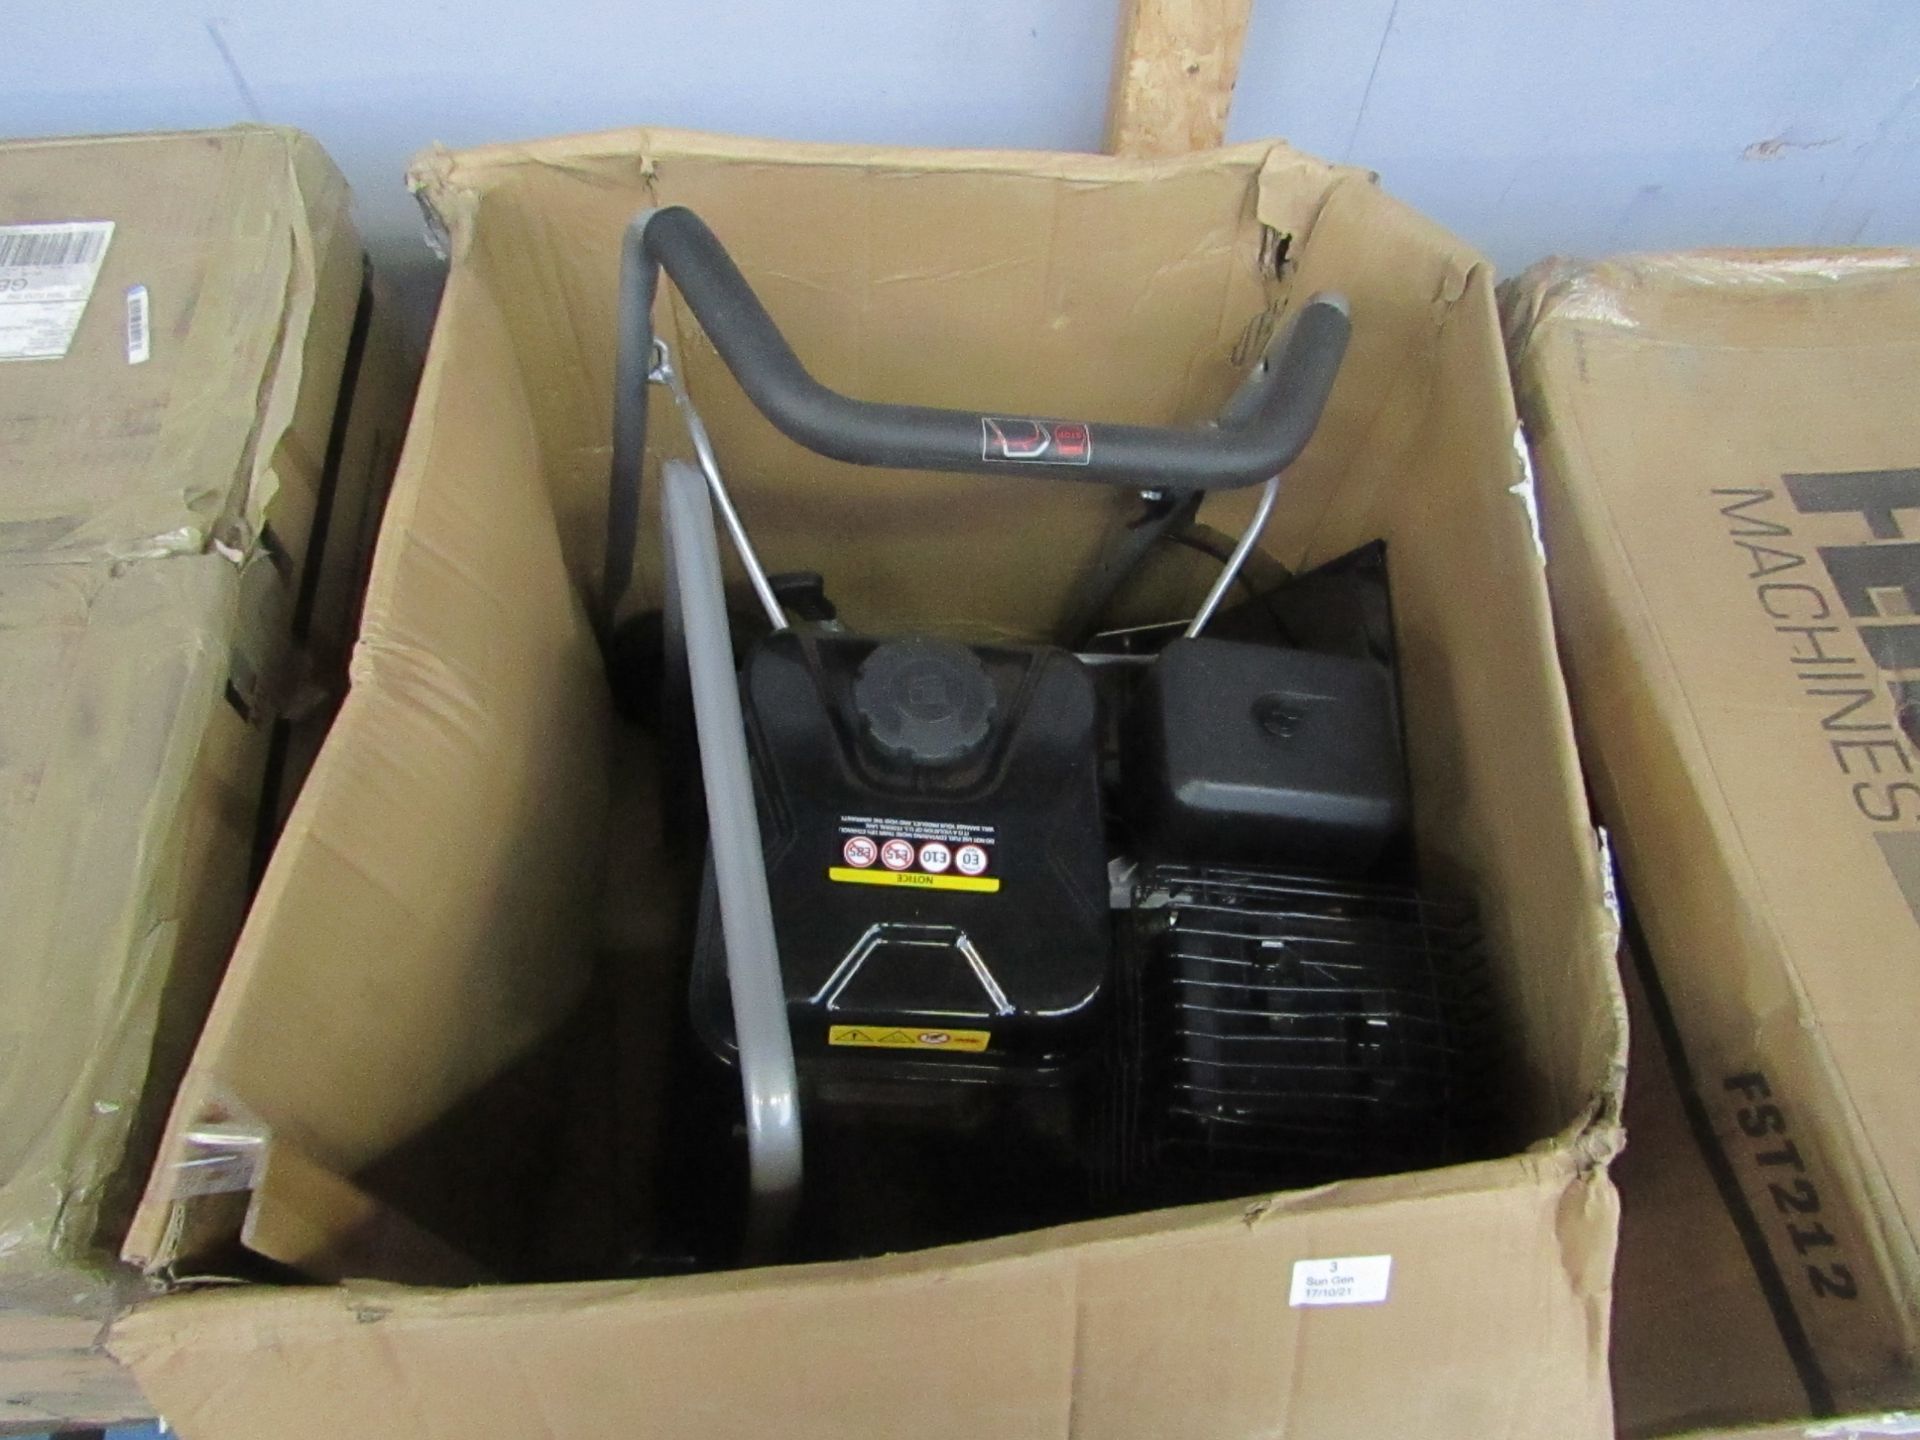 1x Feider FST212 Petrol Lawn scarifier - unchecked & boxed ( box is damaged )- If unsure please do